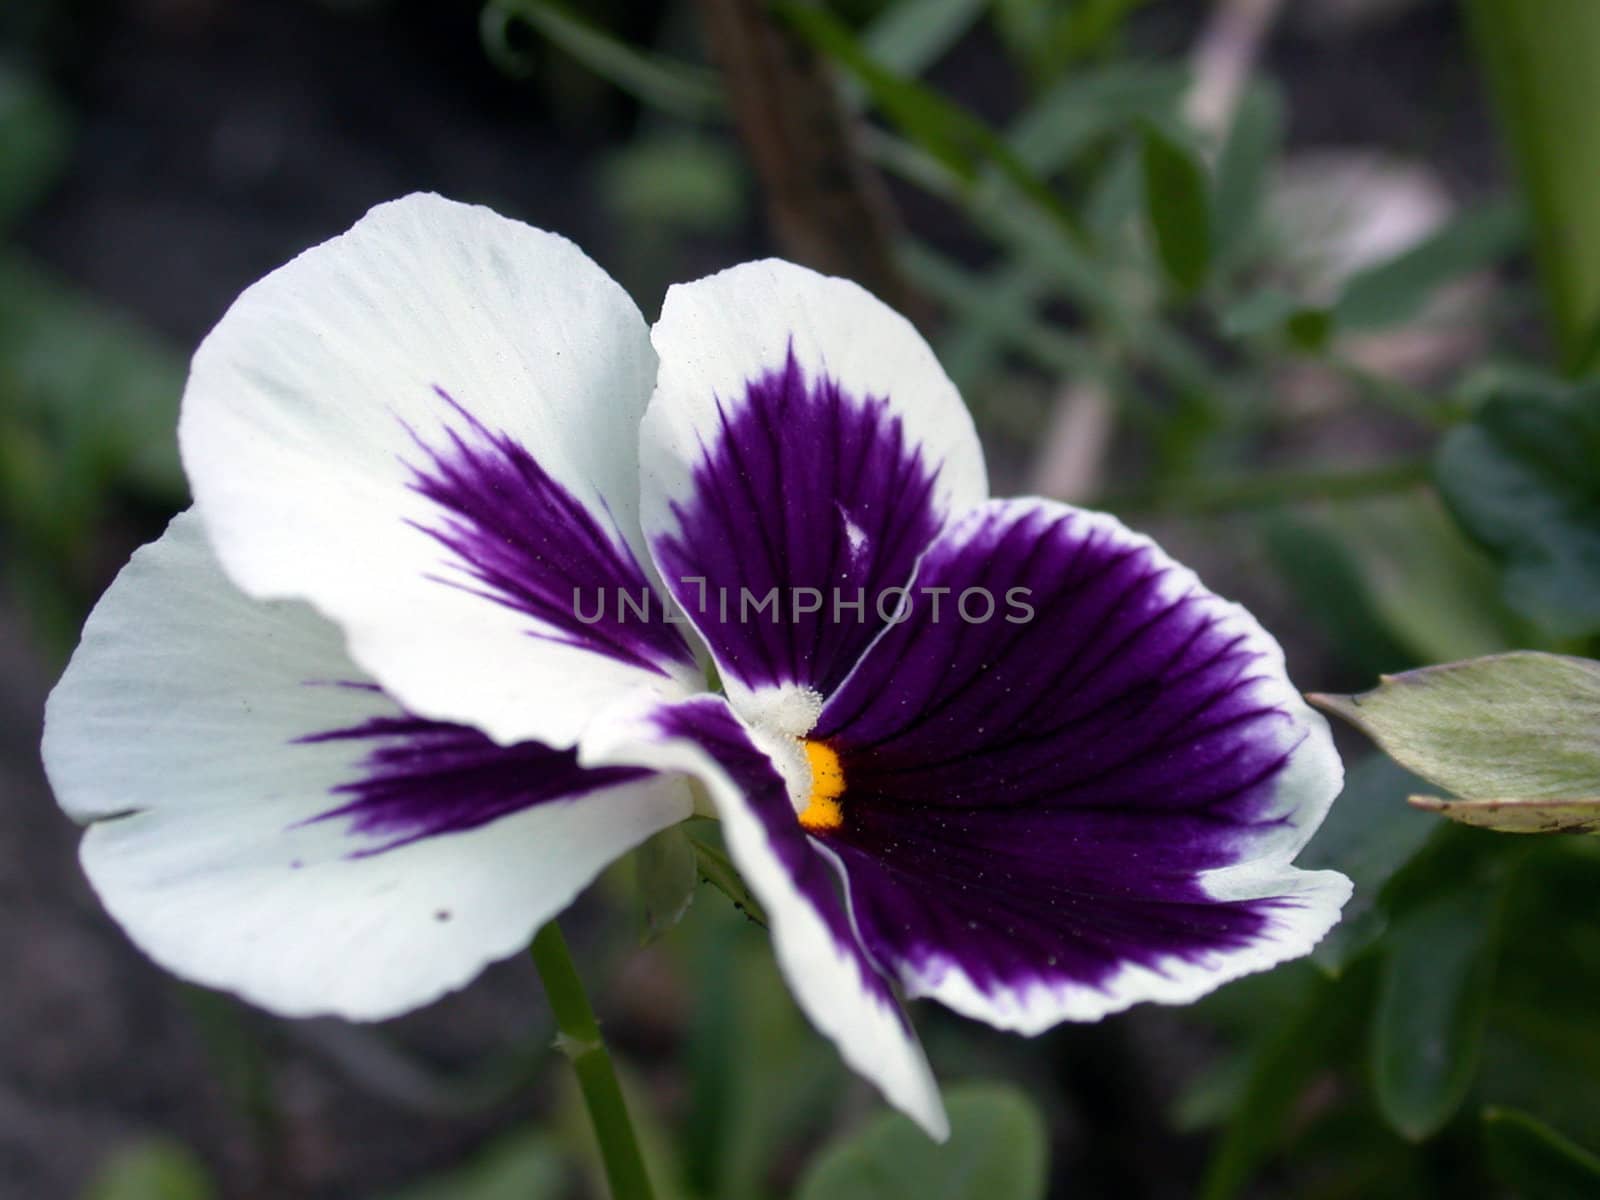 The pansy flower macro